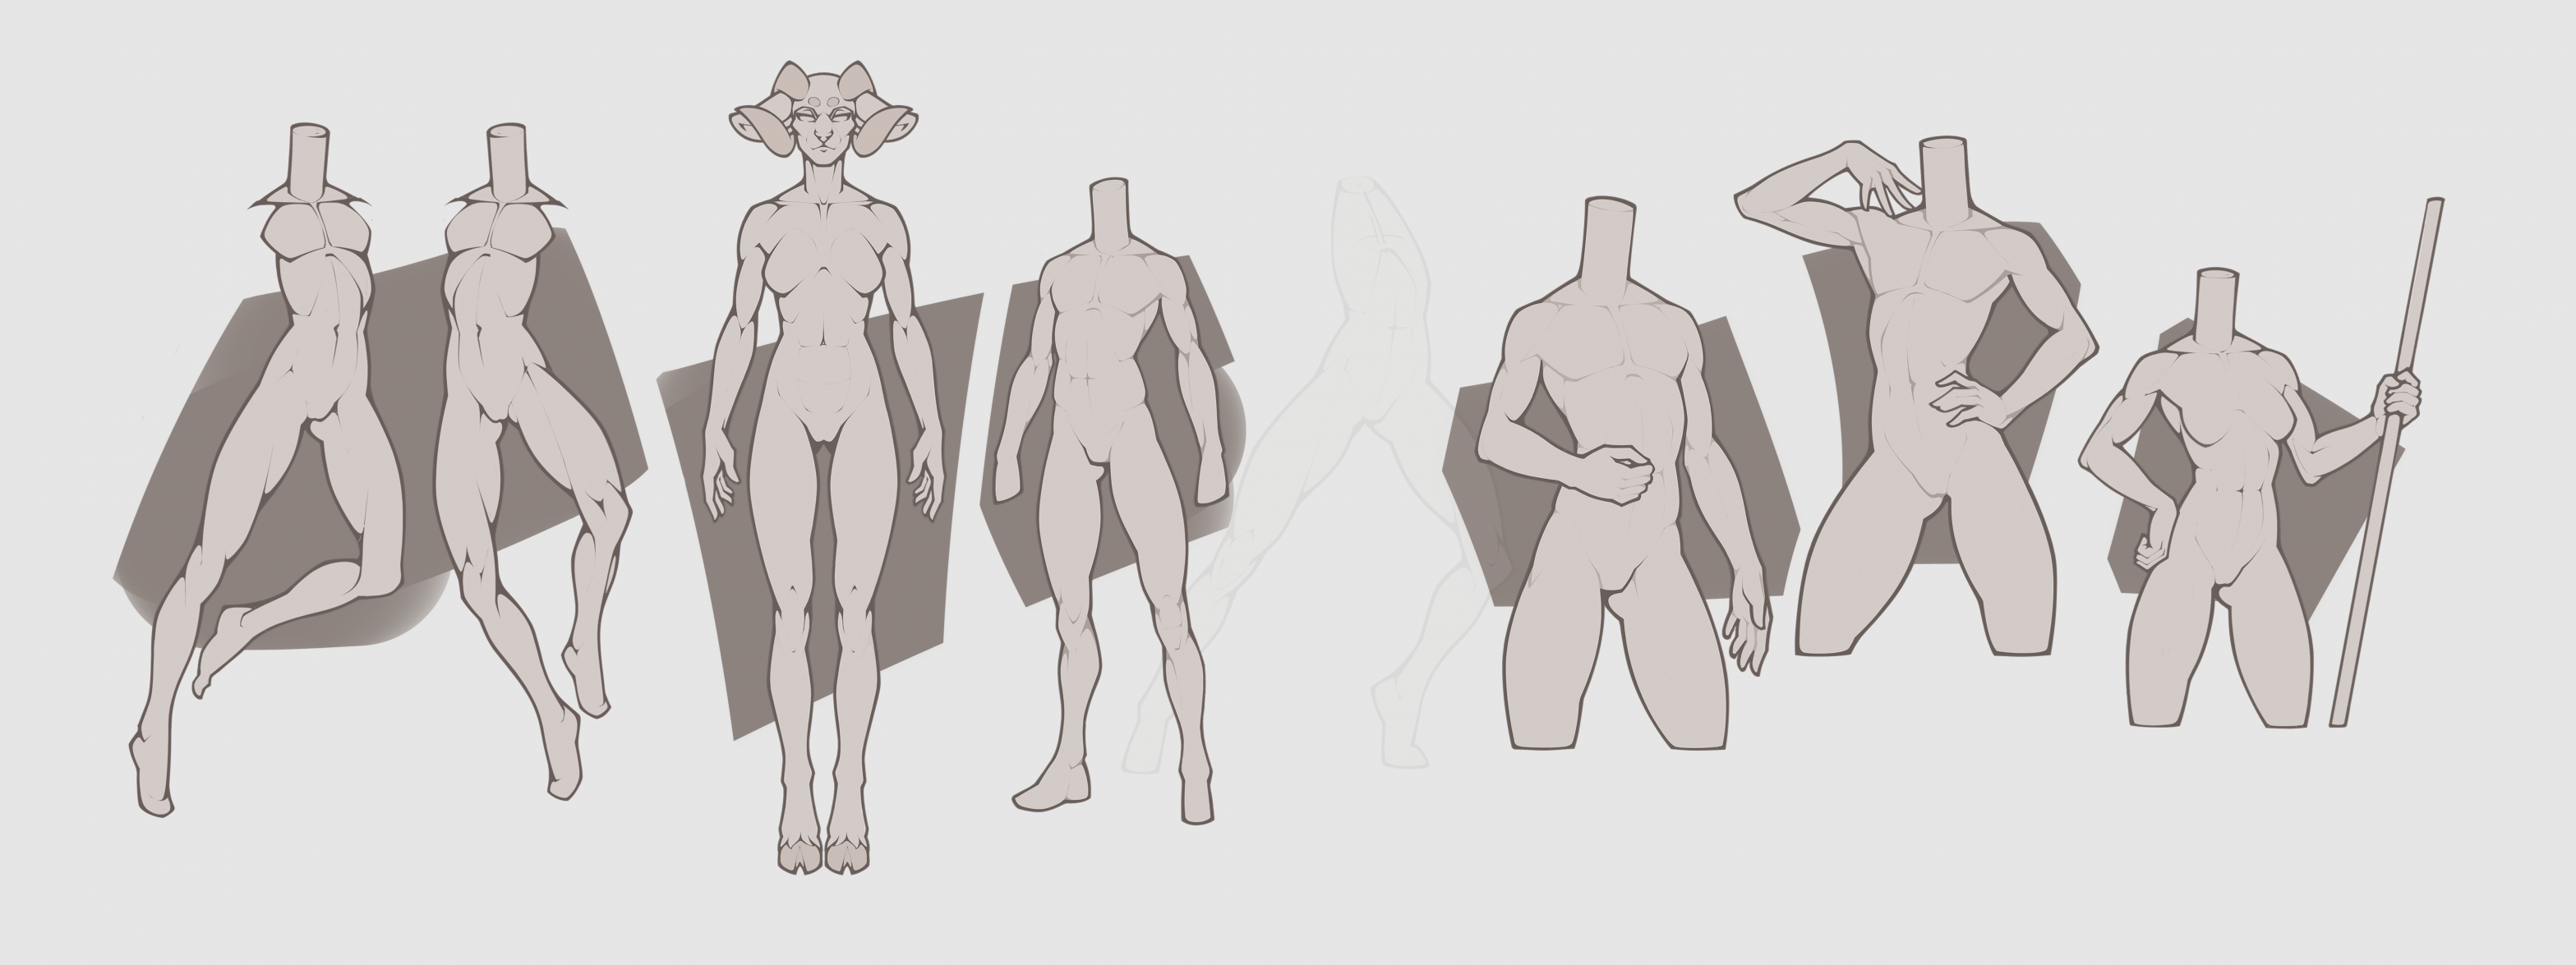 My Sketch Blog — Anatomy study… these are some sketches.